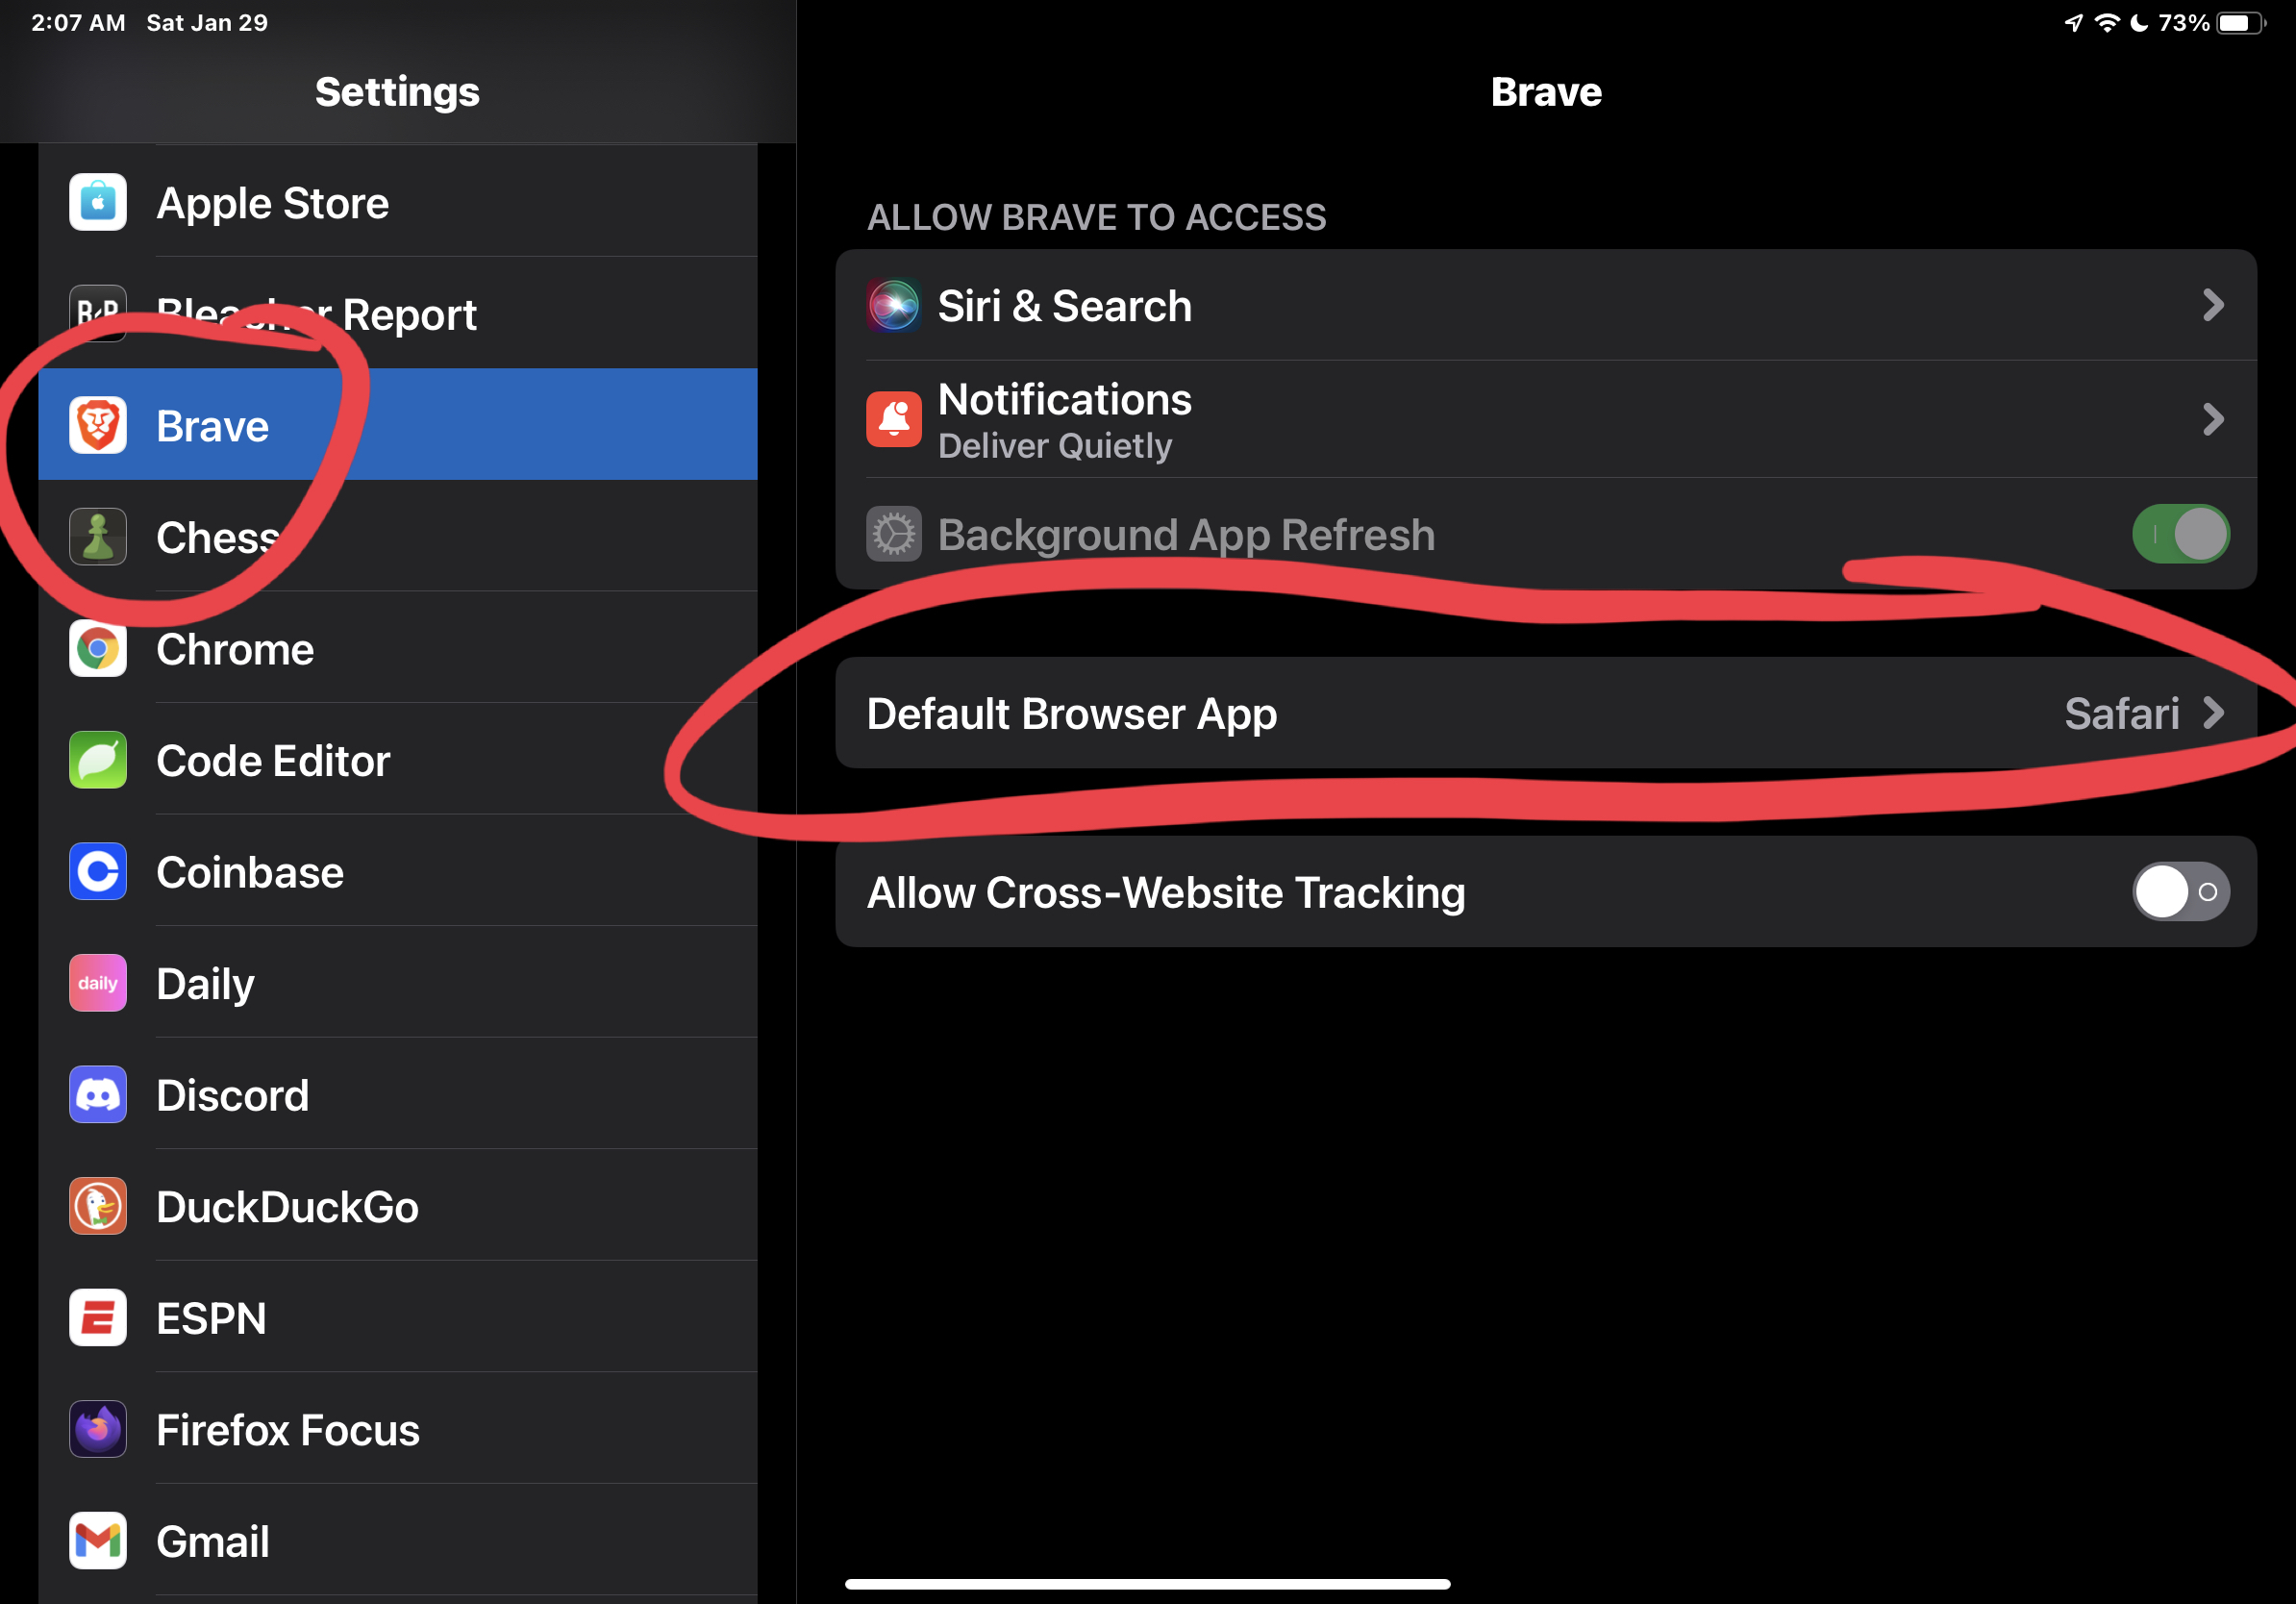 How to Set Brave as Default Browser on iPhone or iPad